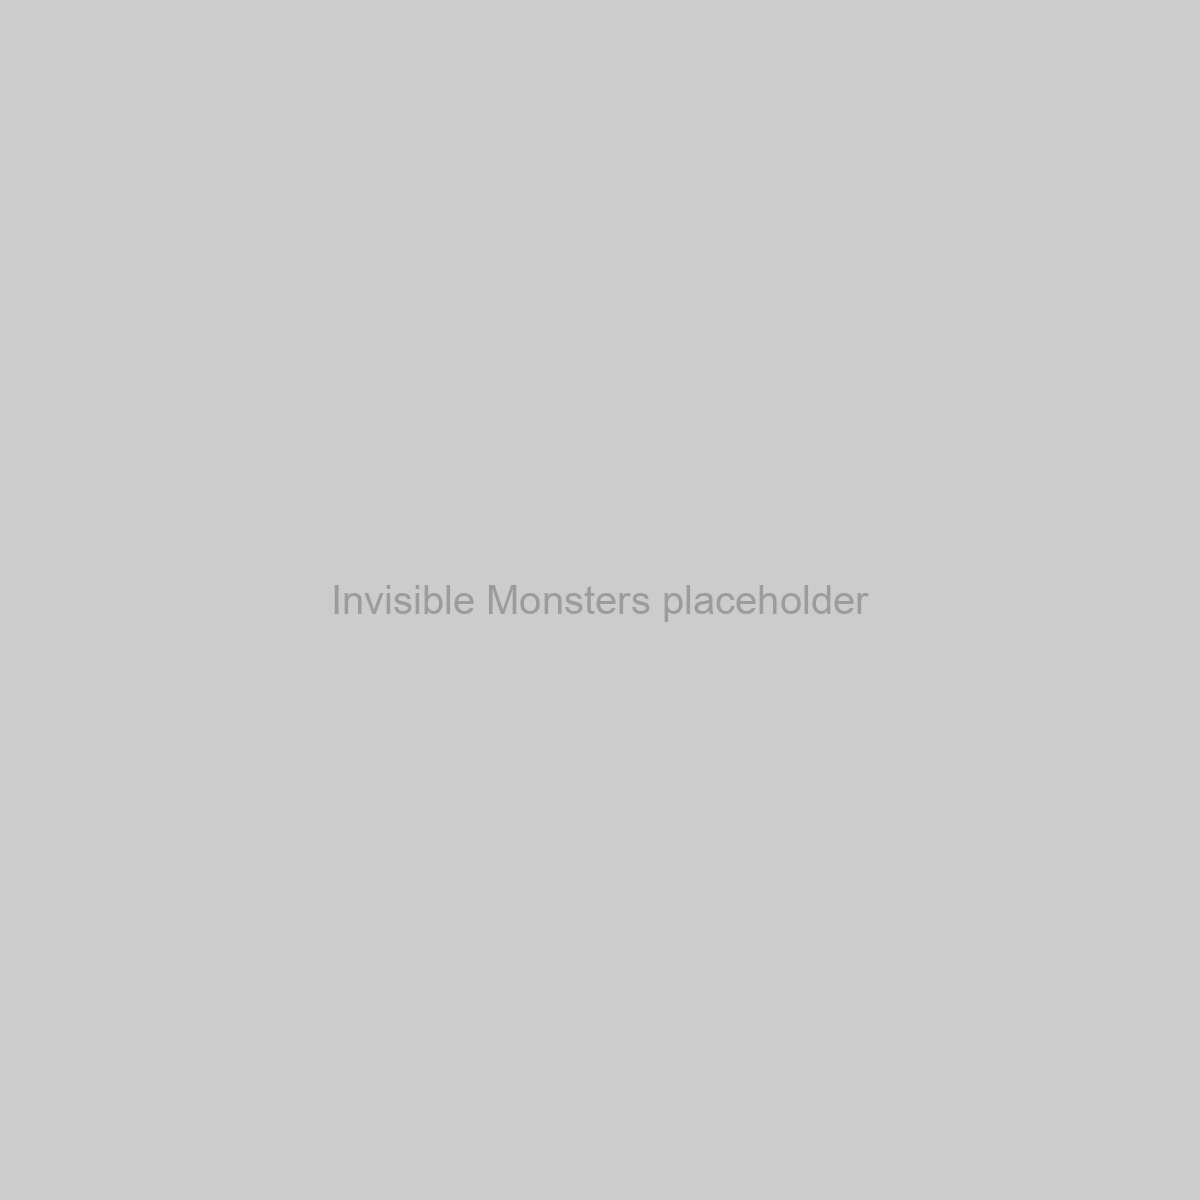 Invisible Monsters Placeholder Image